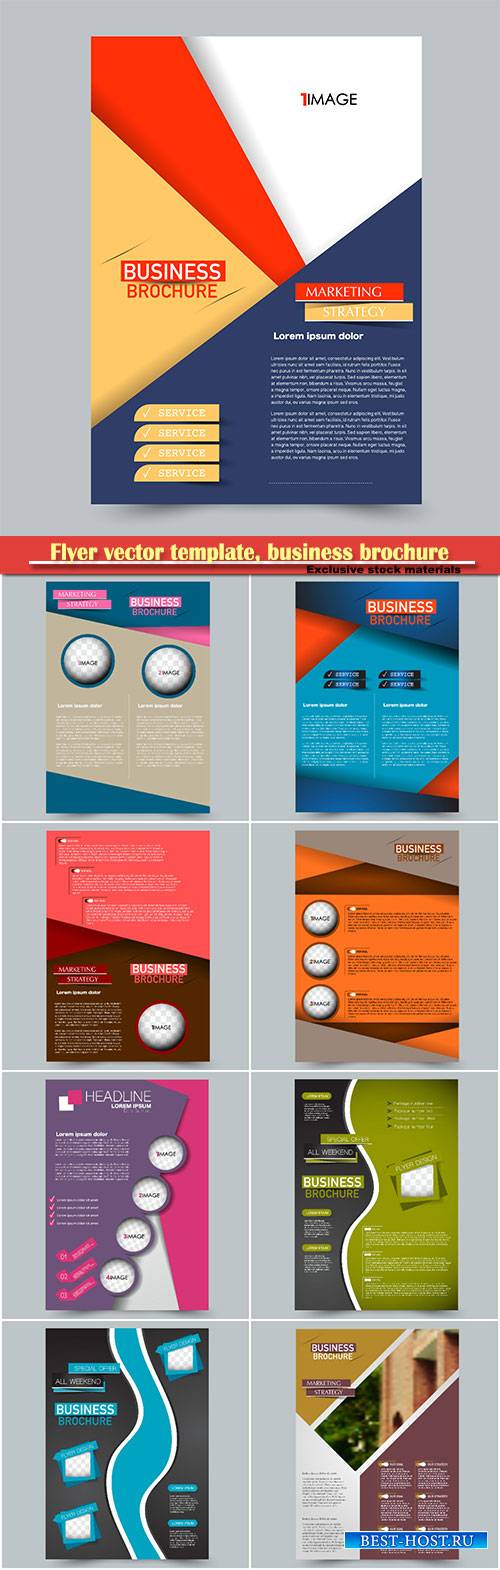 Flyer vector template, business brochure, magazine cover # 36